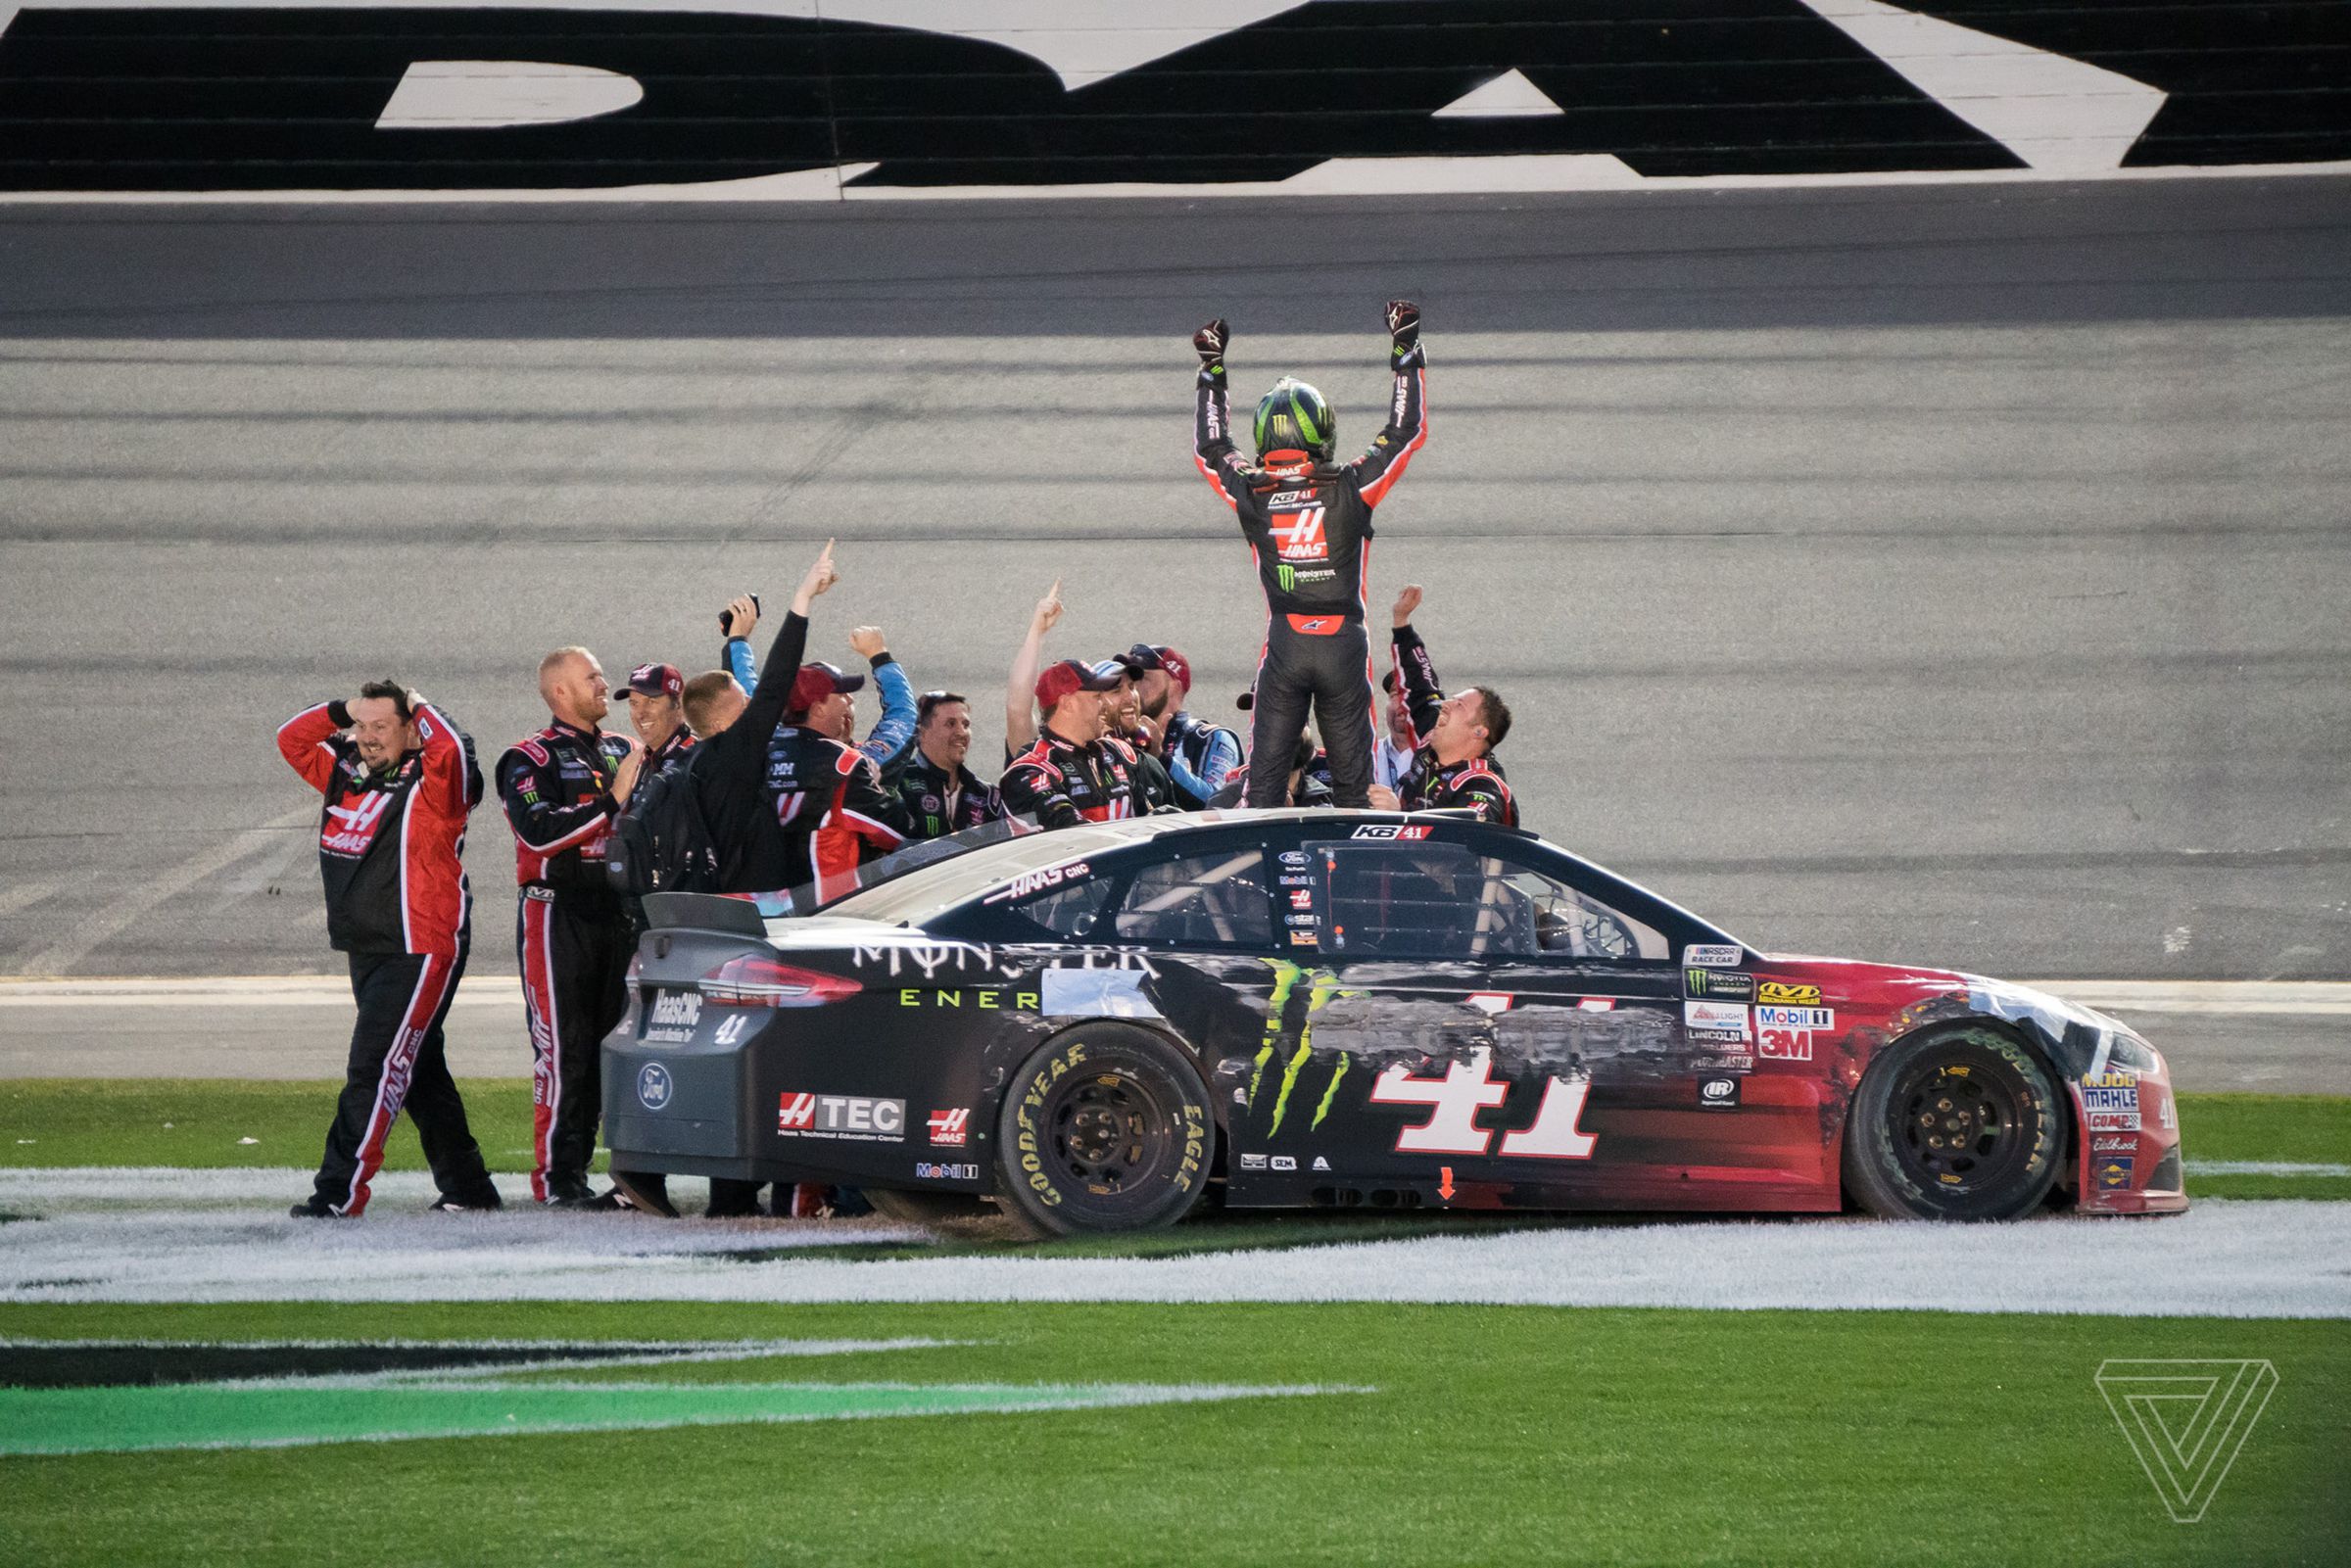 From top: (1) Kaz Grala, 18, celebrates winning the NextEra Energy Resources 250. He became the youngest winner ever in NASCAR’s top three series. (2) Ryan Reed climbs out of his car after winning the Xfinity series race at Daytona. His last — and only other — win was the same race at Daytona in 2015. (3) Kurt Busch celebrates his Daytona 500 win with his teammates. Busch sustained heavy damage and still was able to take home his first ever 500 win.